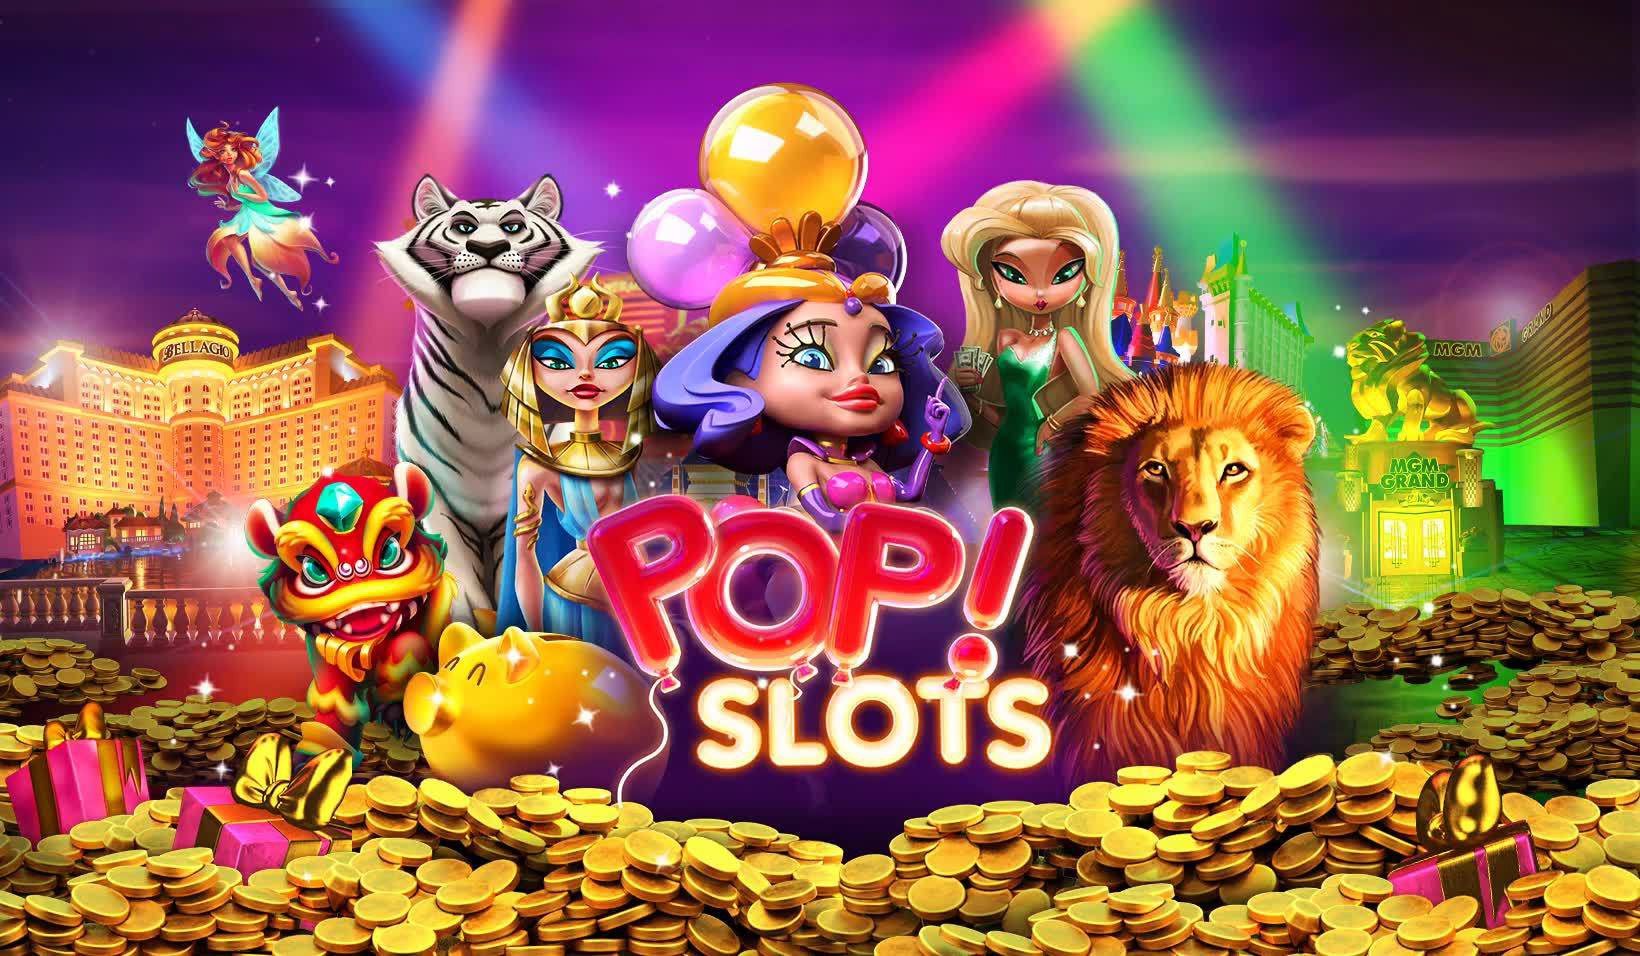 pop slots free chips and coins